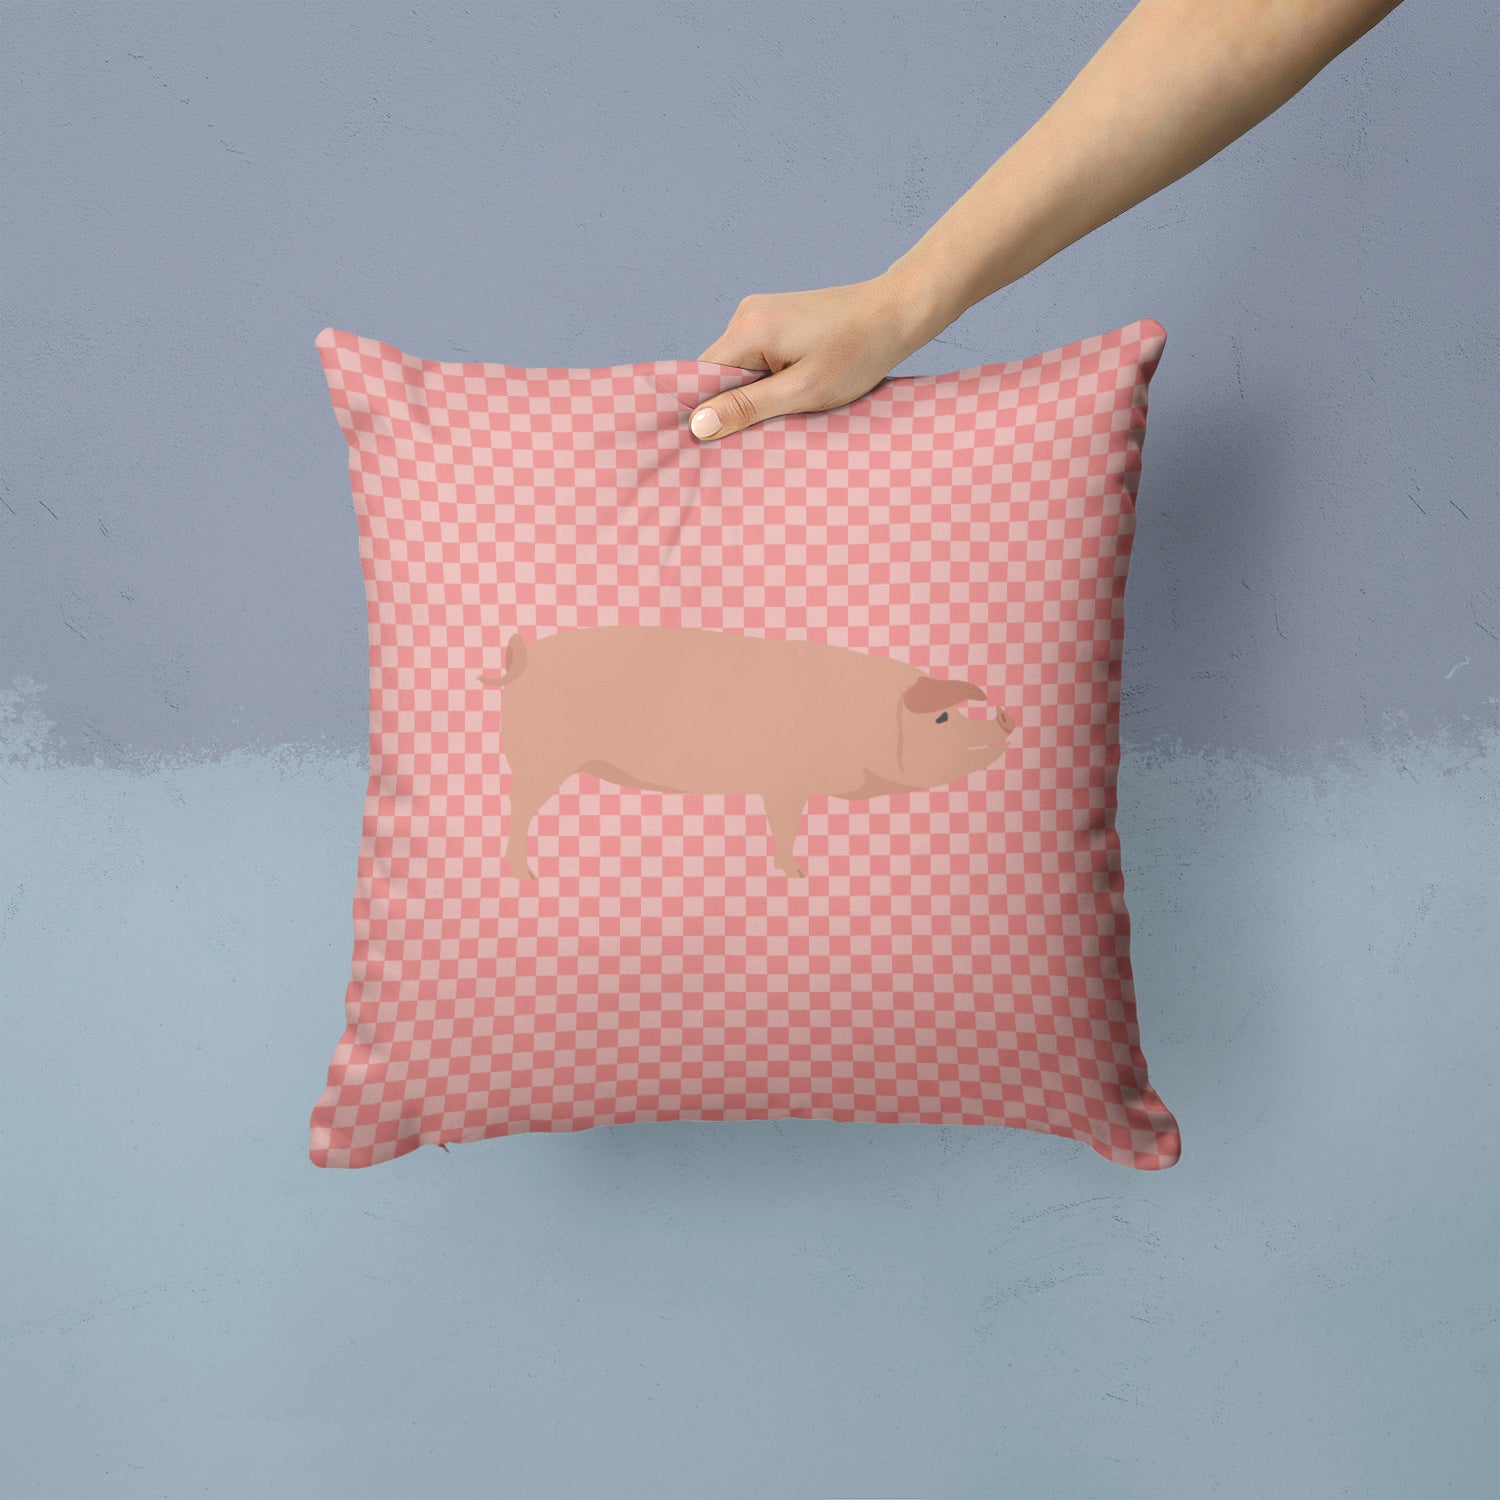 American Landrace Pig Pink Check Fabric Decorative Pillow BB7932PW1414 - the-store.com